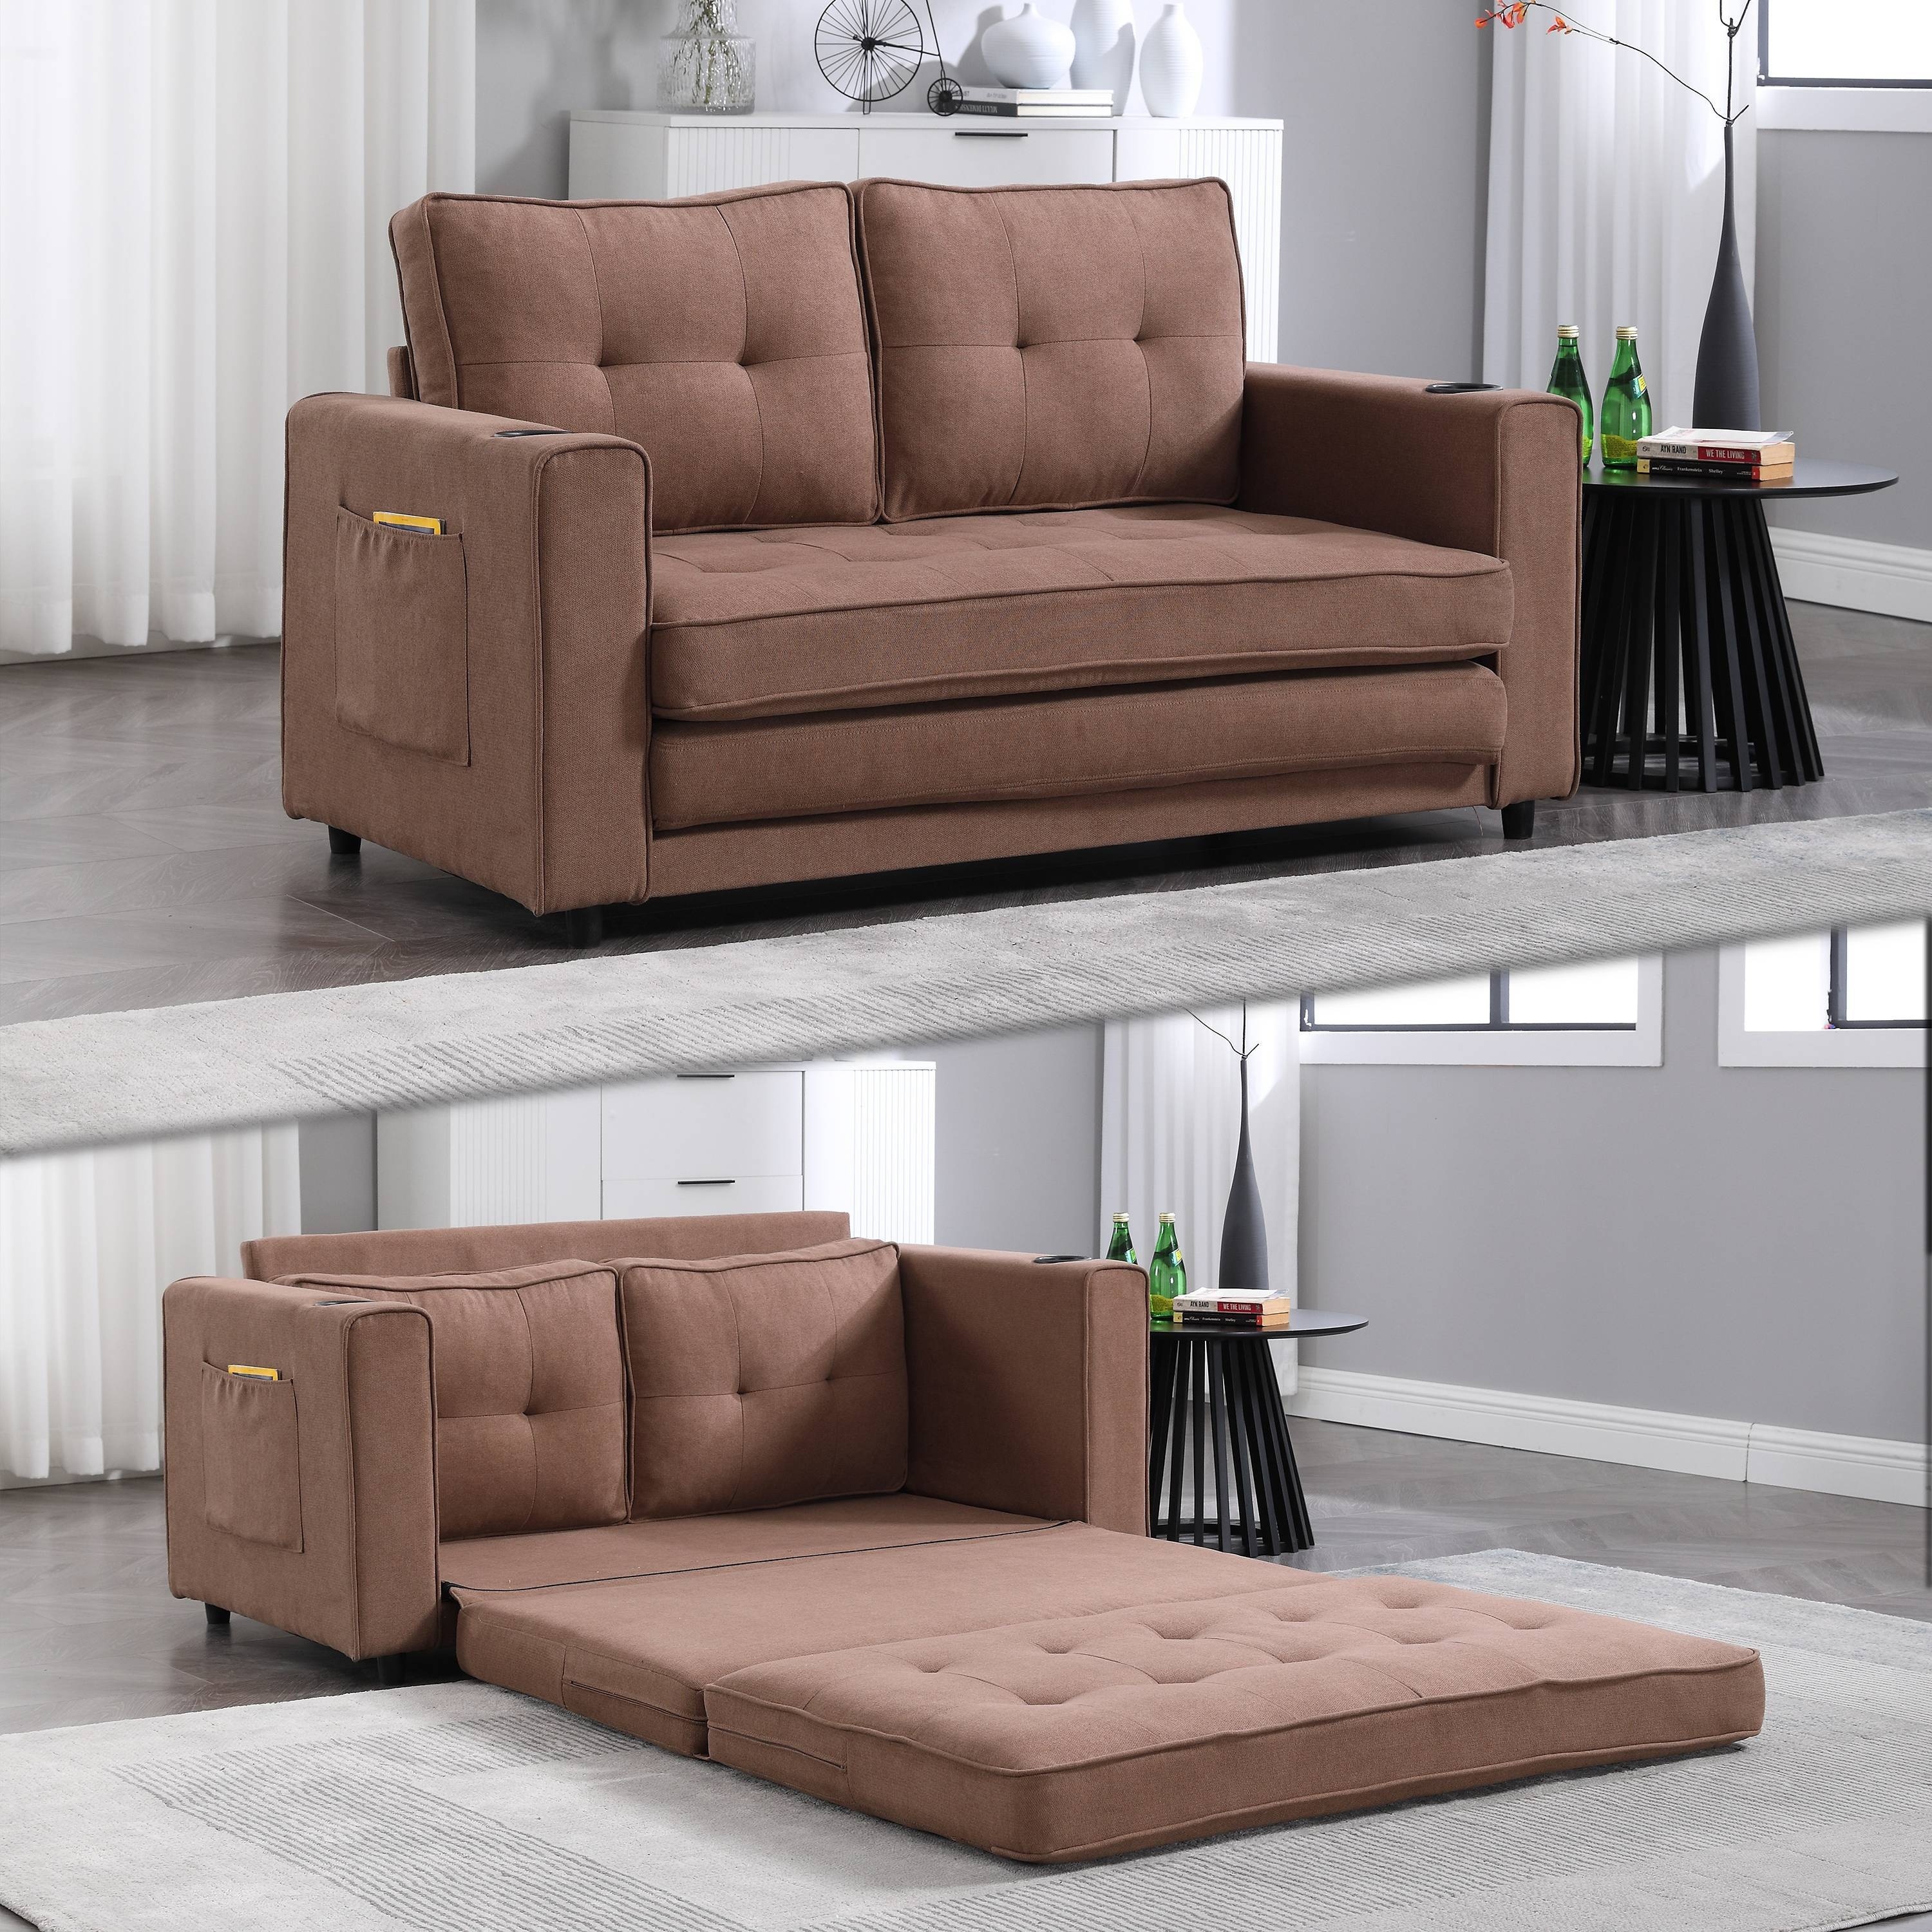 

3-in-1 Fabric Folding Sofa Bed, Can Be Converted Into A Floor Sofa Bed, Foldable Buckle Patterned Double Seat With Pull-out Sleeping Sofa Bed, With Side Pockets, Suitable For Living Rooms.